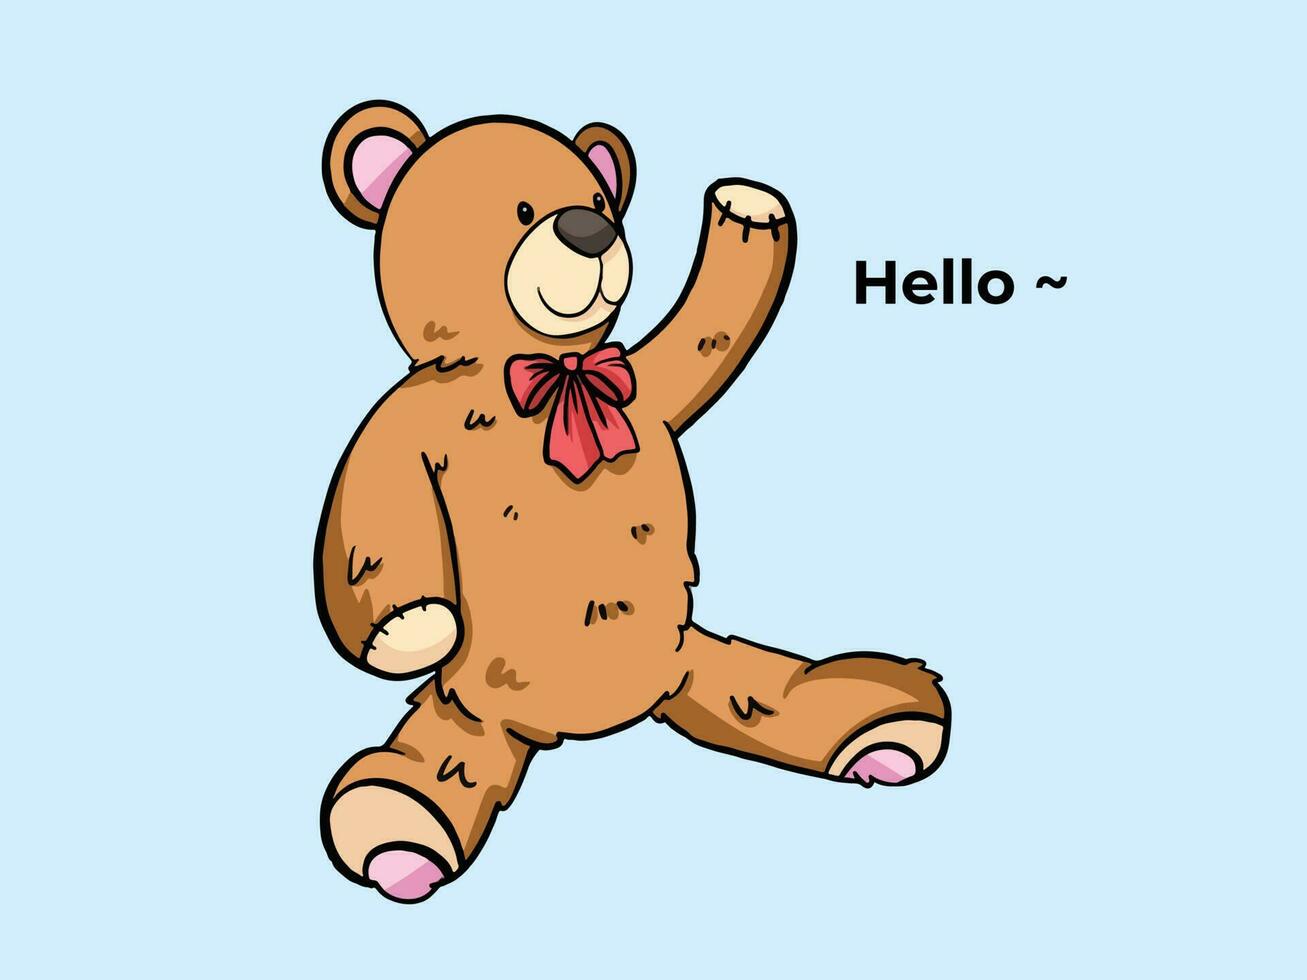 Cute soft brown teddy bear vector illustration with hello greetings gesture pose isolated on horizontal baby blue background. Outlined simple flat art styled drawing.